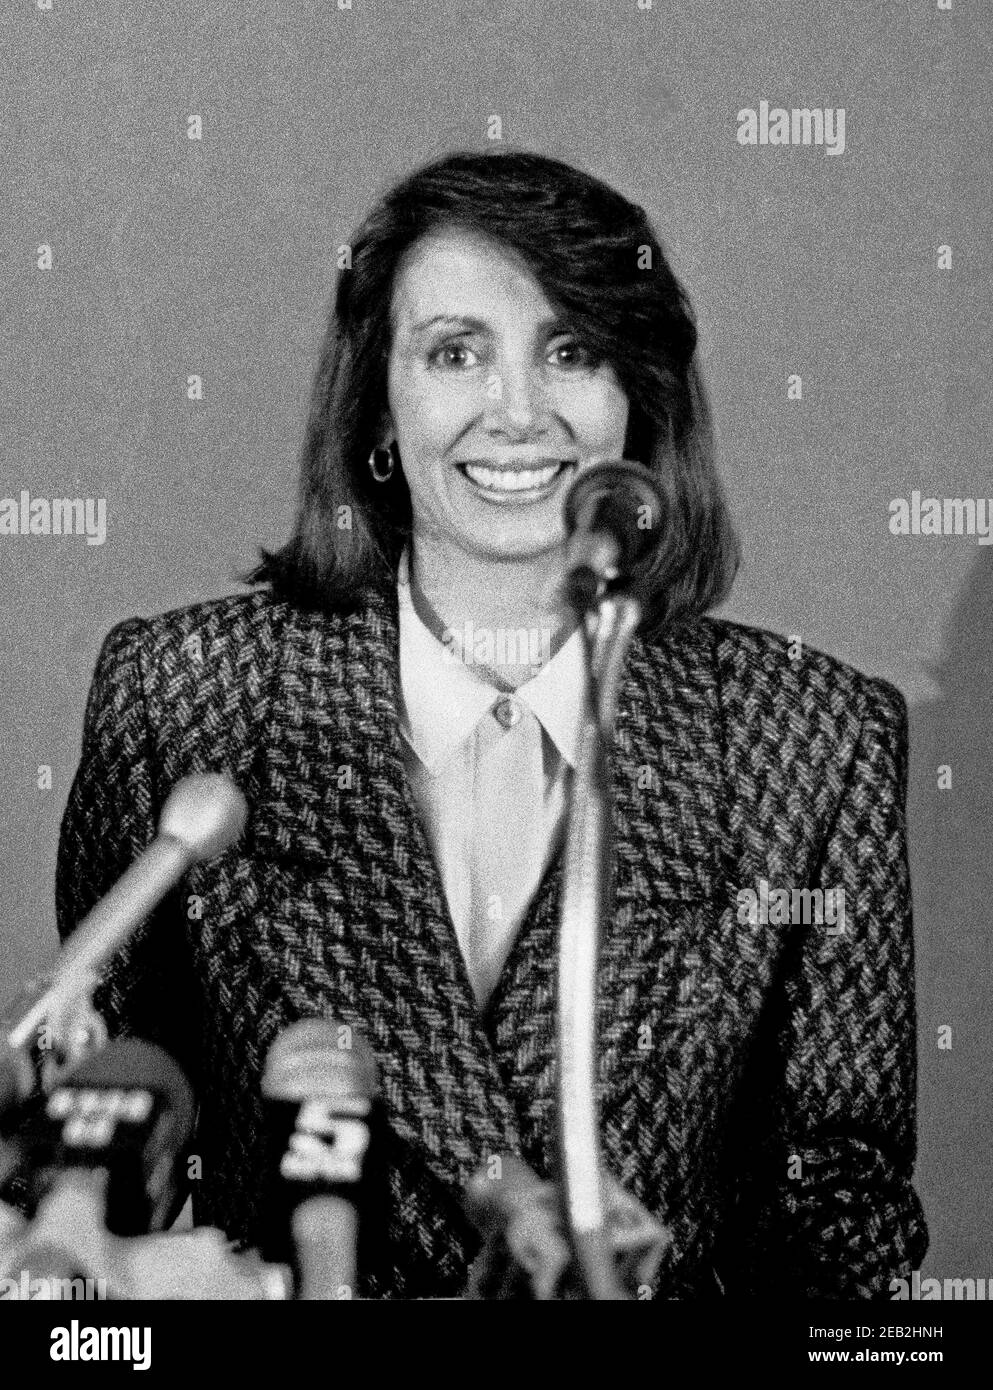 Nancy Pelosi runs as the Democratic party candidate for a seat in the US House of representatives. 1987 Stock Photo